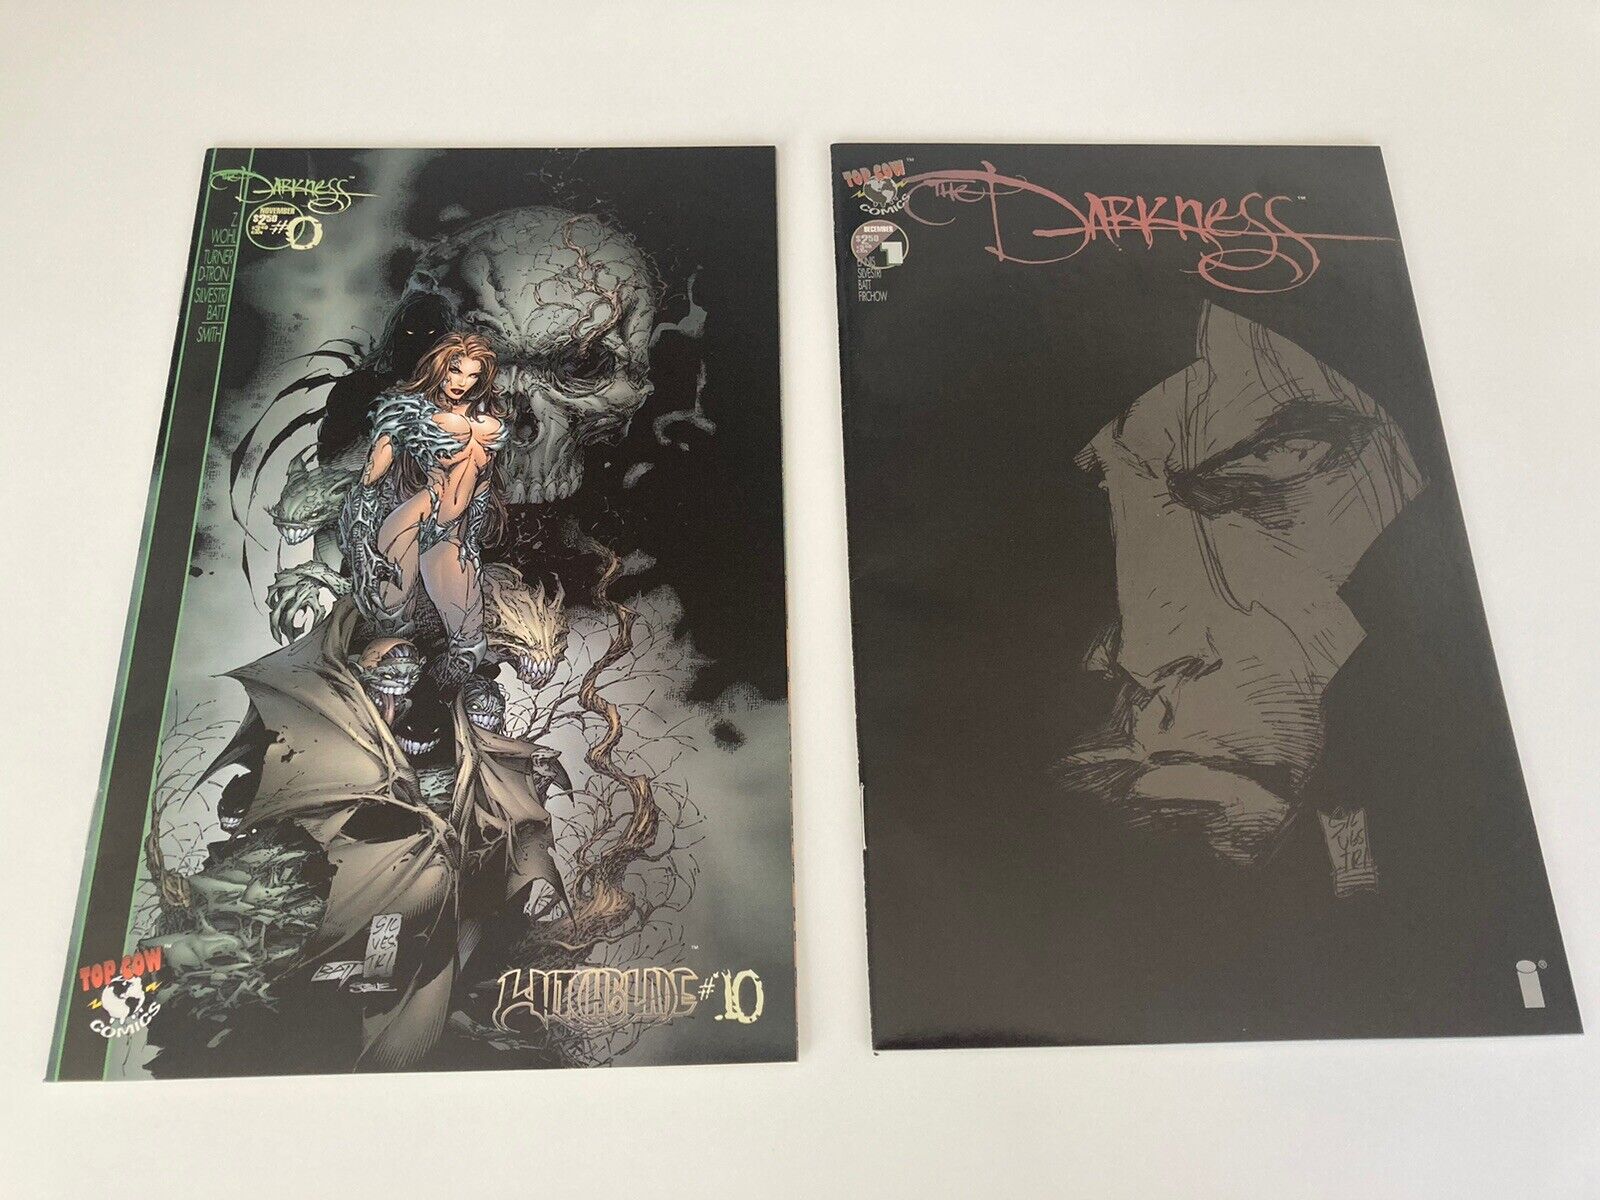 Witchblade #10 variant + Darkness 1 variant 1st appearances of Darkness